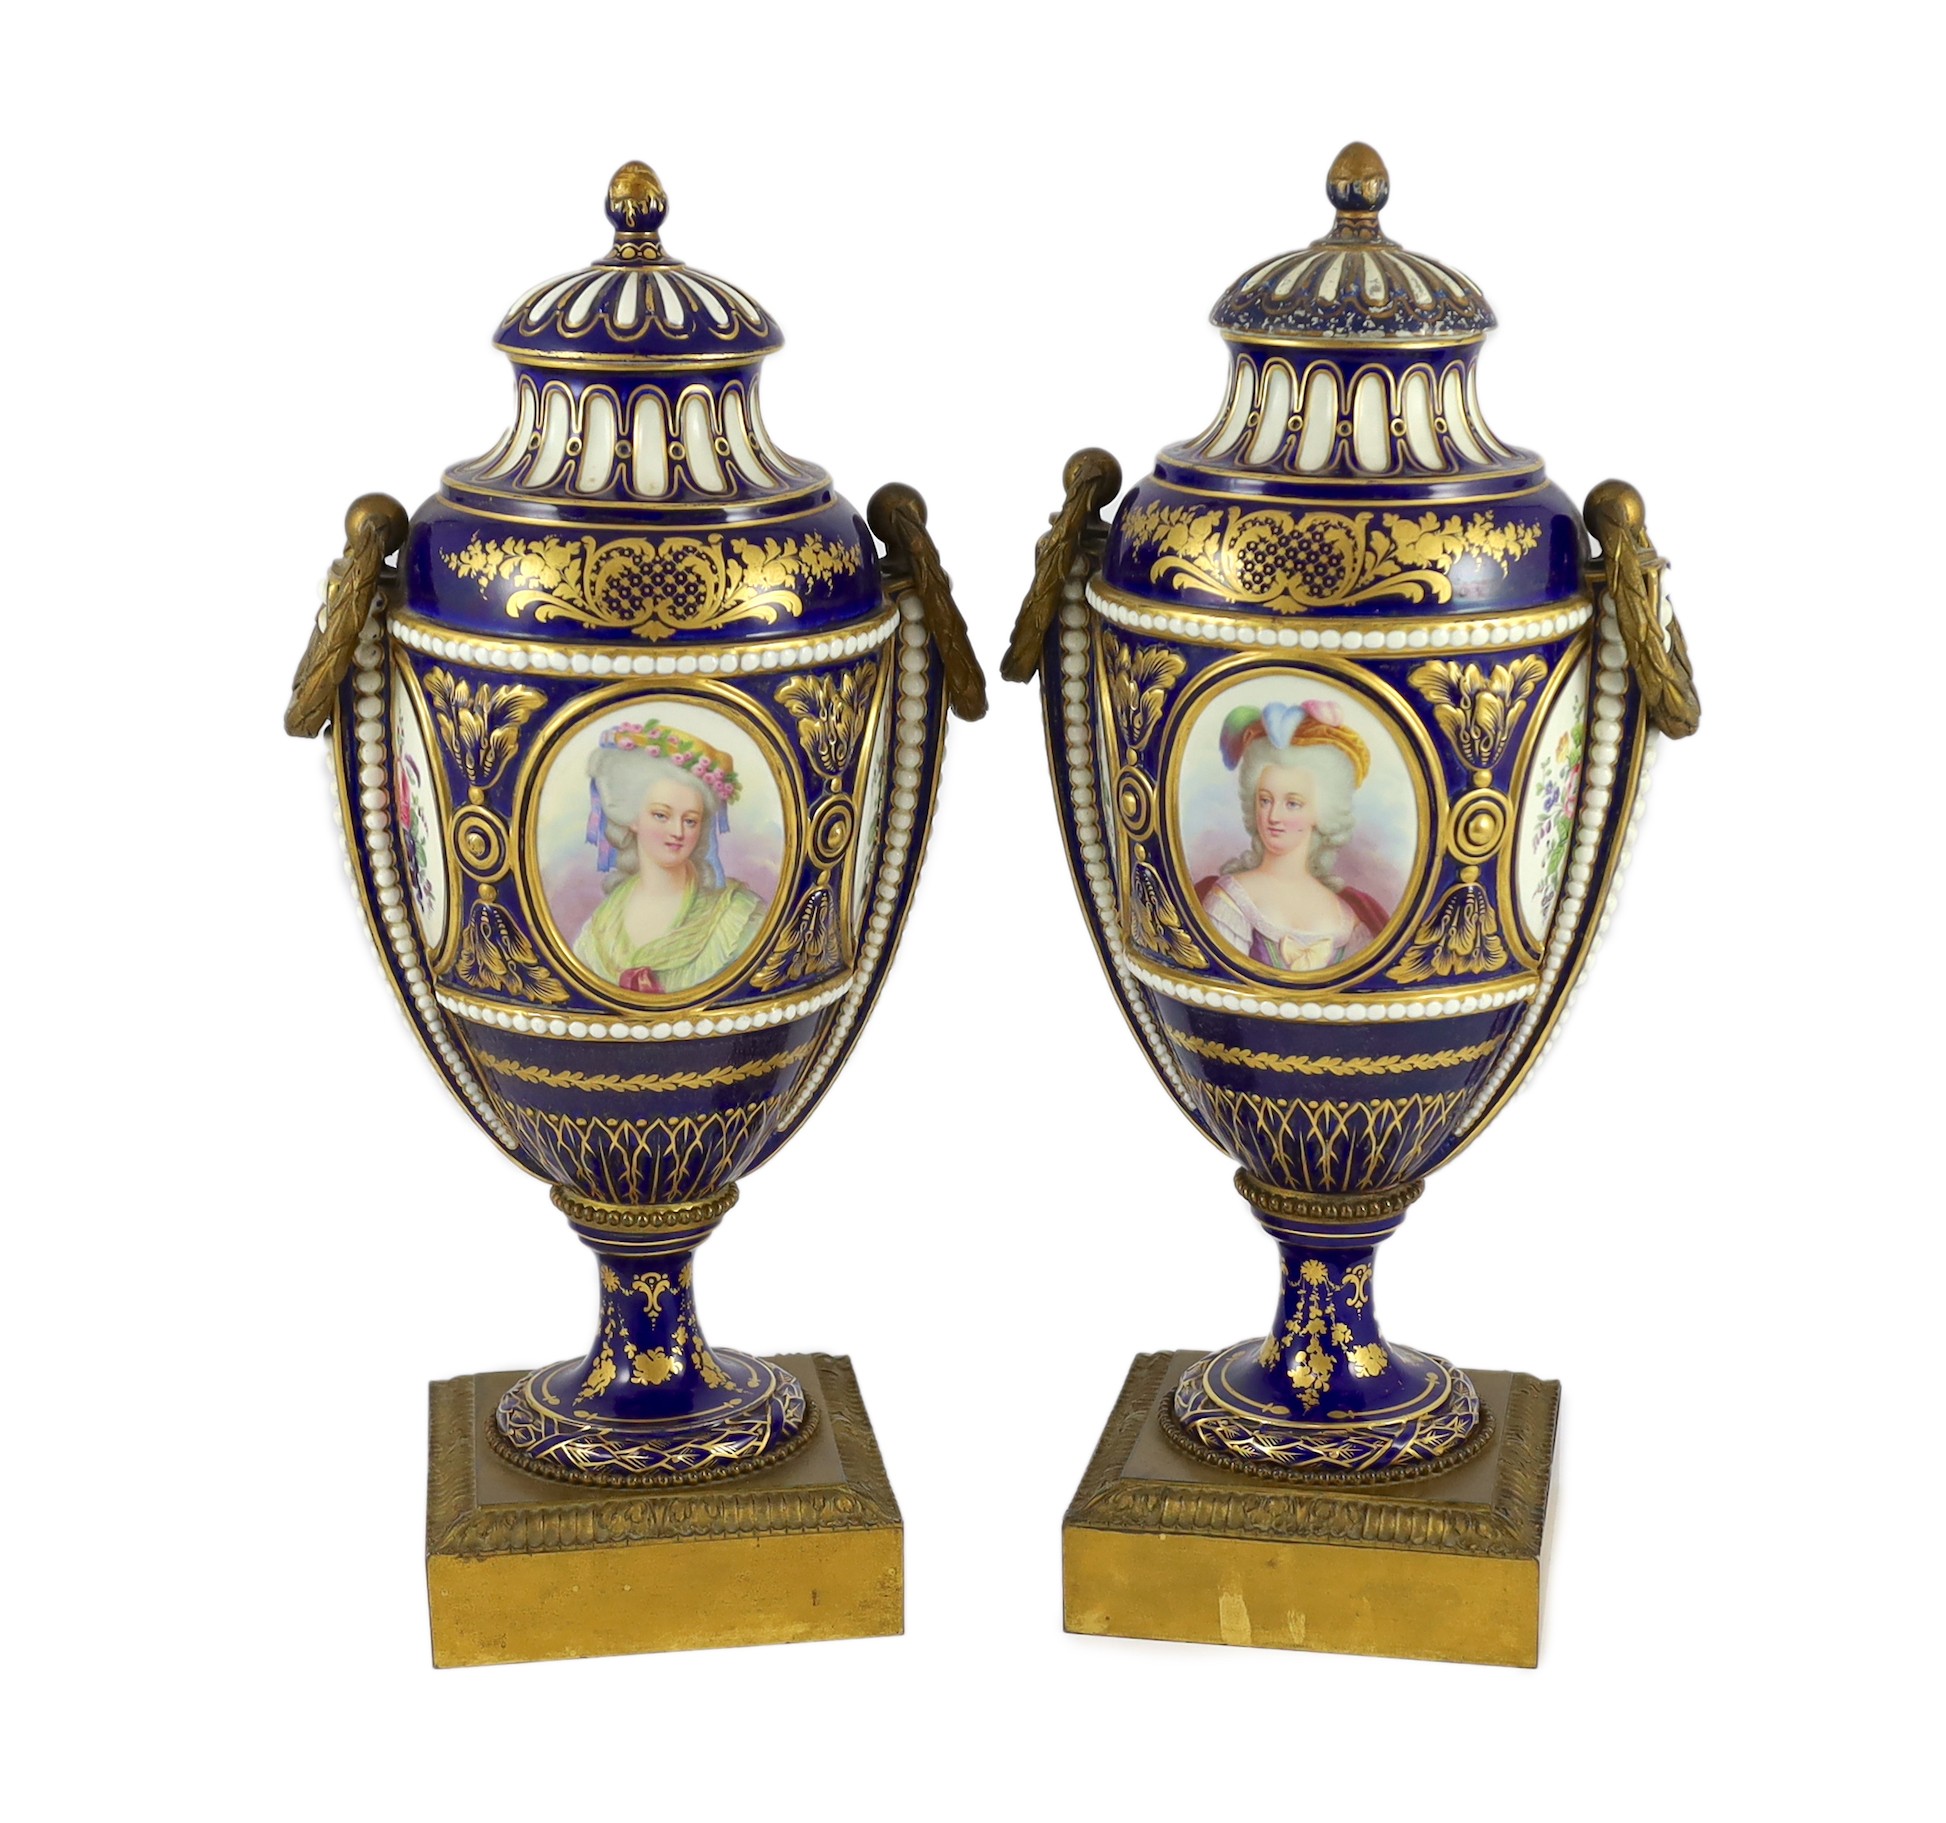 A pair of English porcelain Sevres style ormolu mounted vases and covers, mid 19th century, 44cm high, one replacement cover